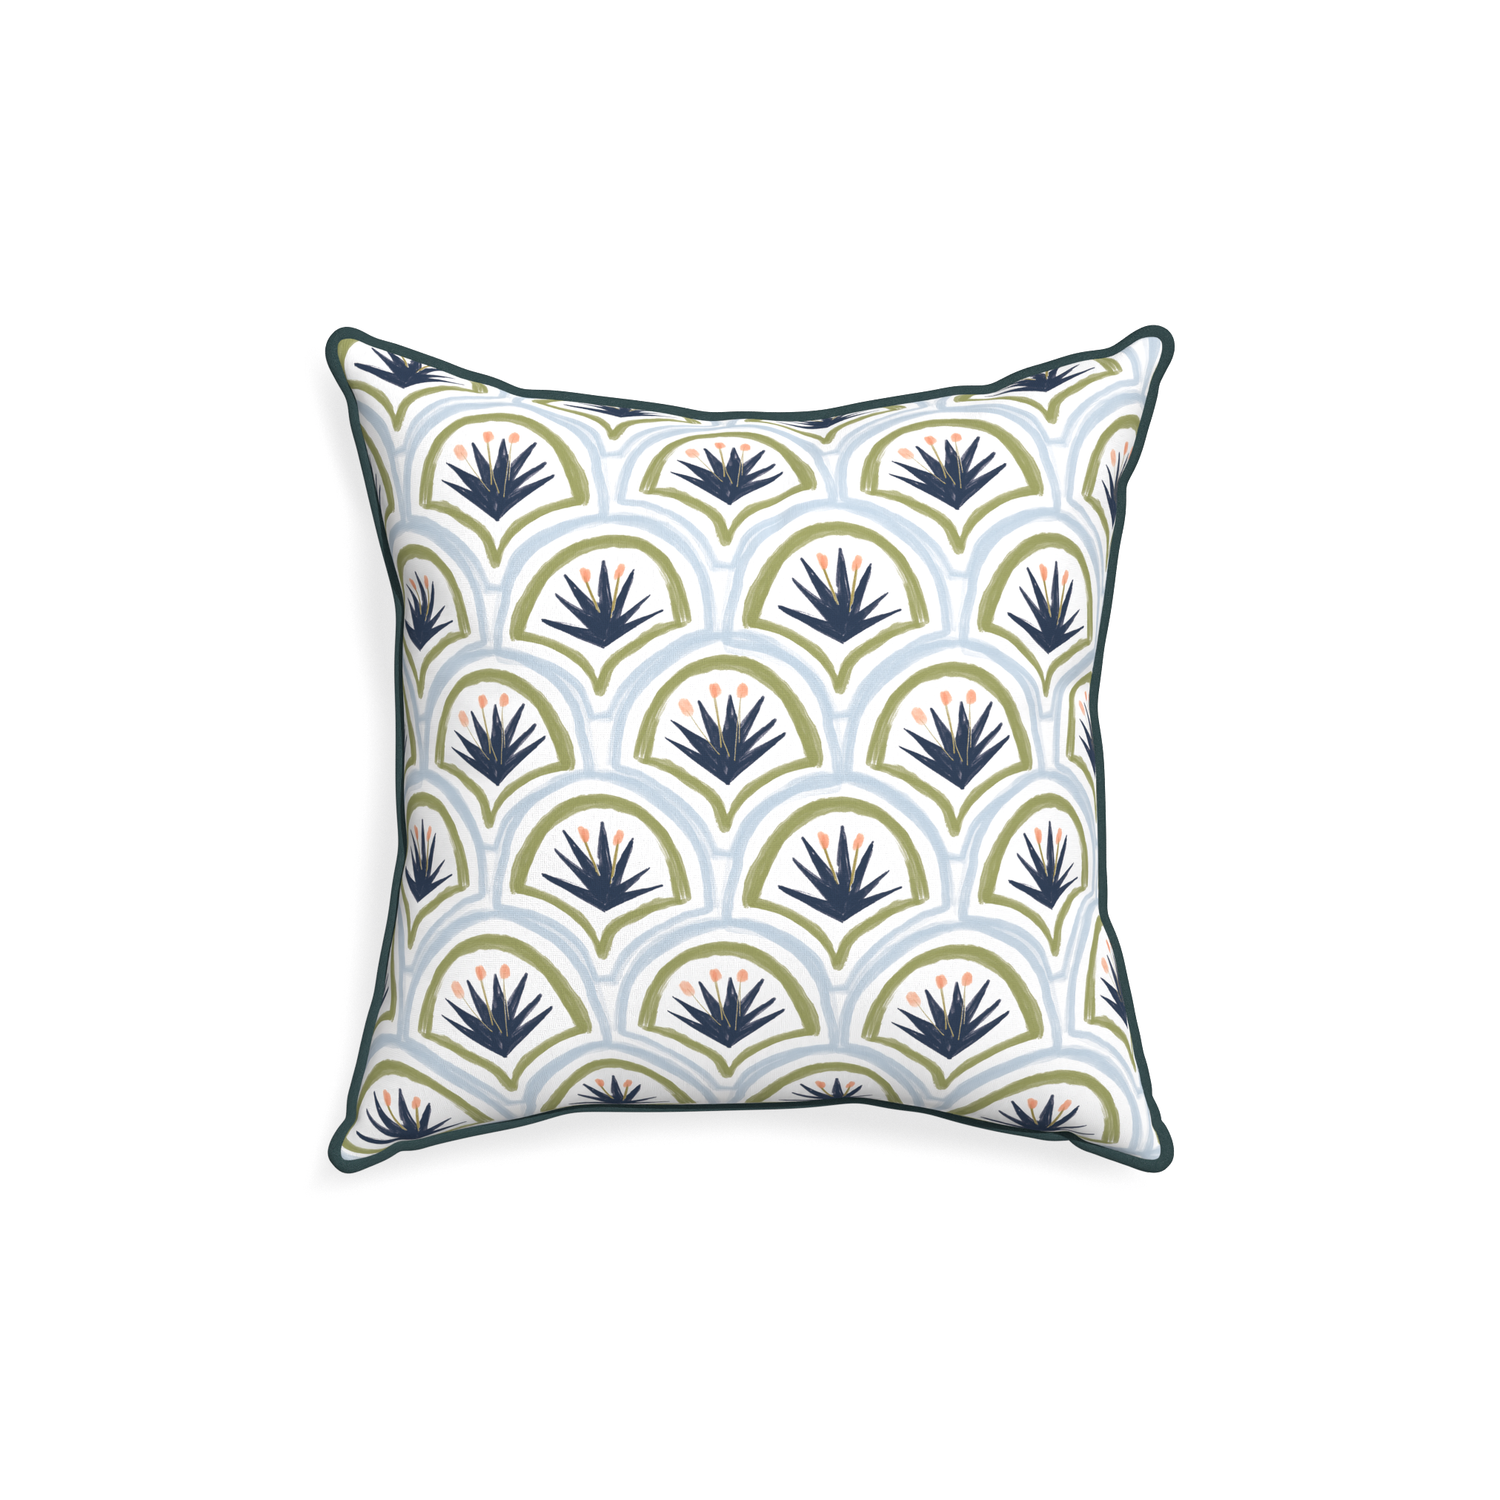 18-square thatcher midnight custom art deco palm patternpillow with p piping on white background